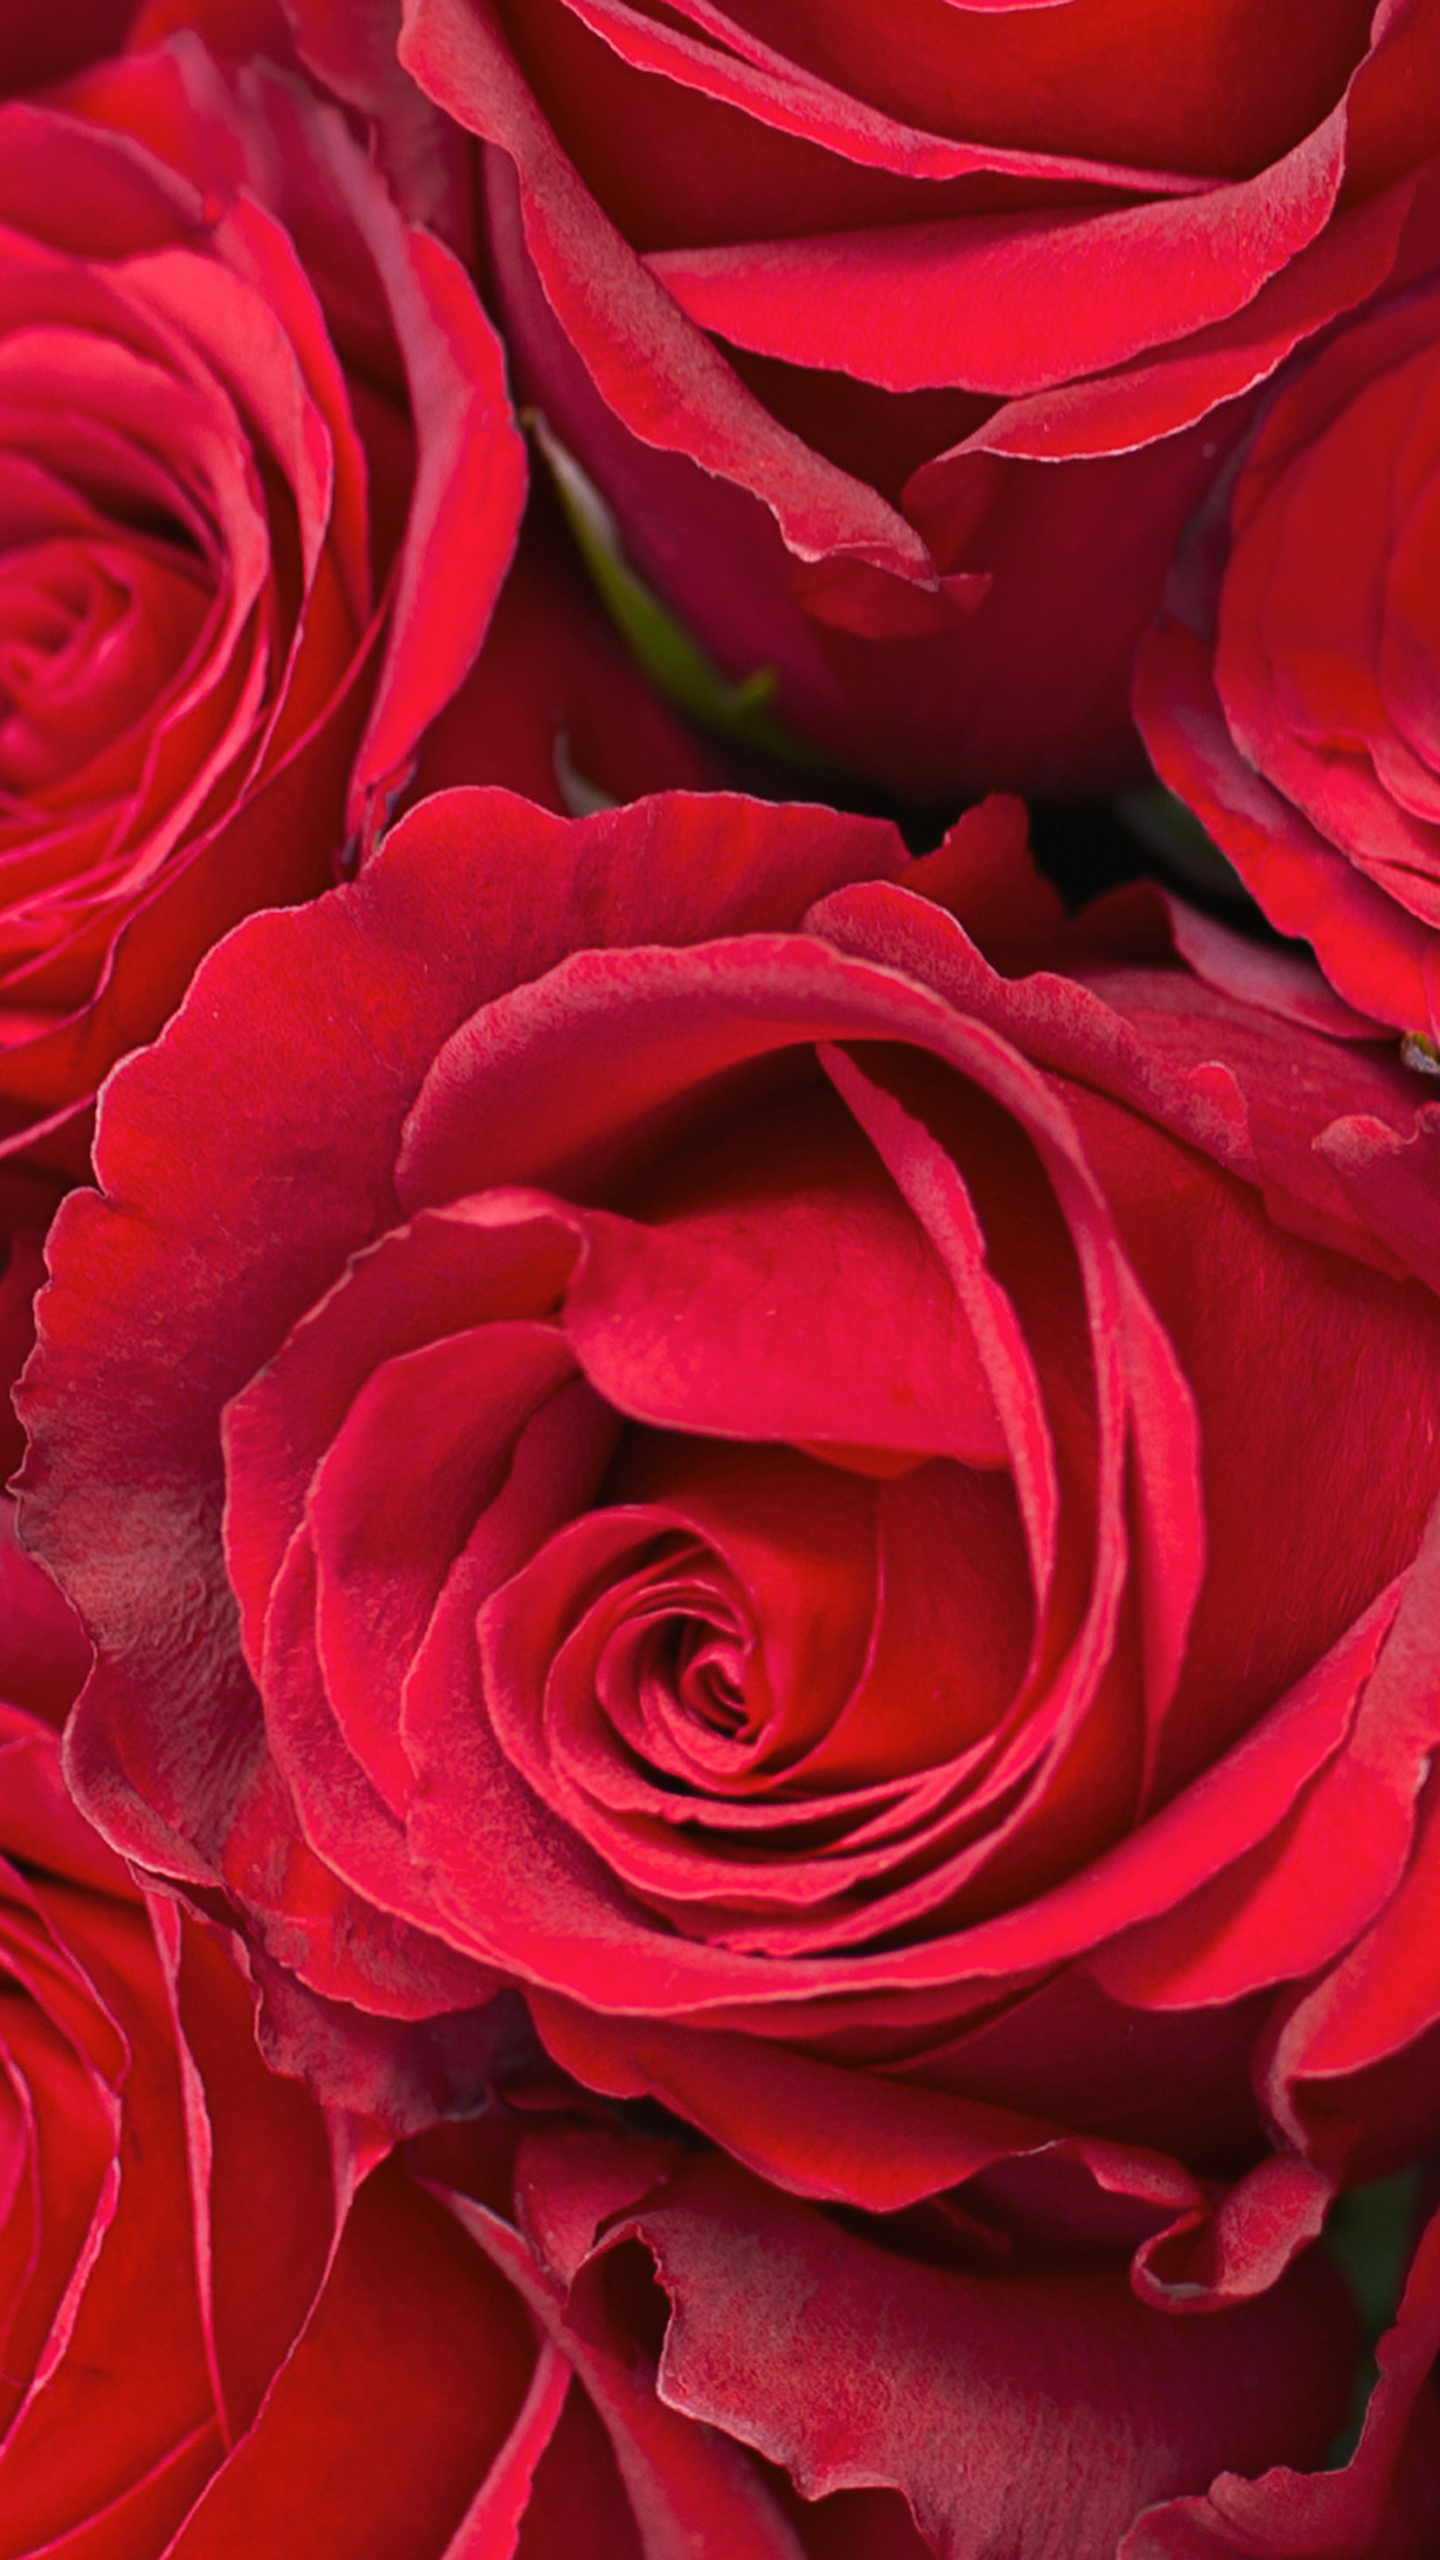 1440x2560 Samsung Galaxy S7 Red Roses Wallpaper